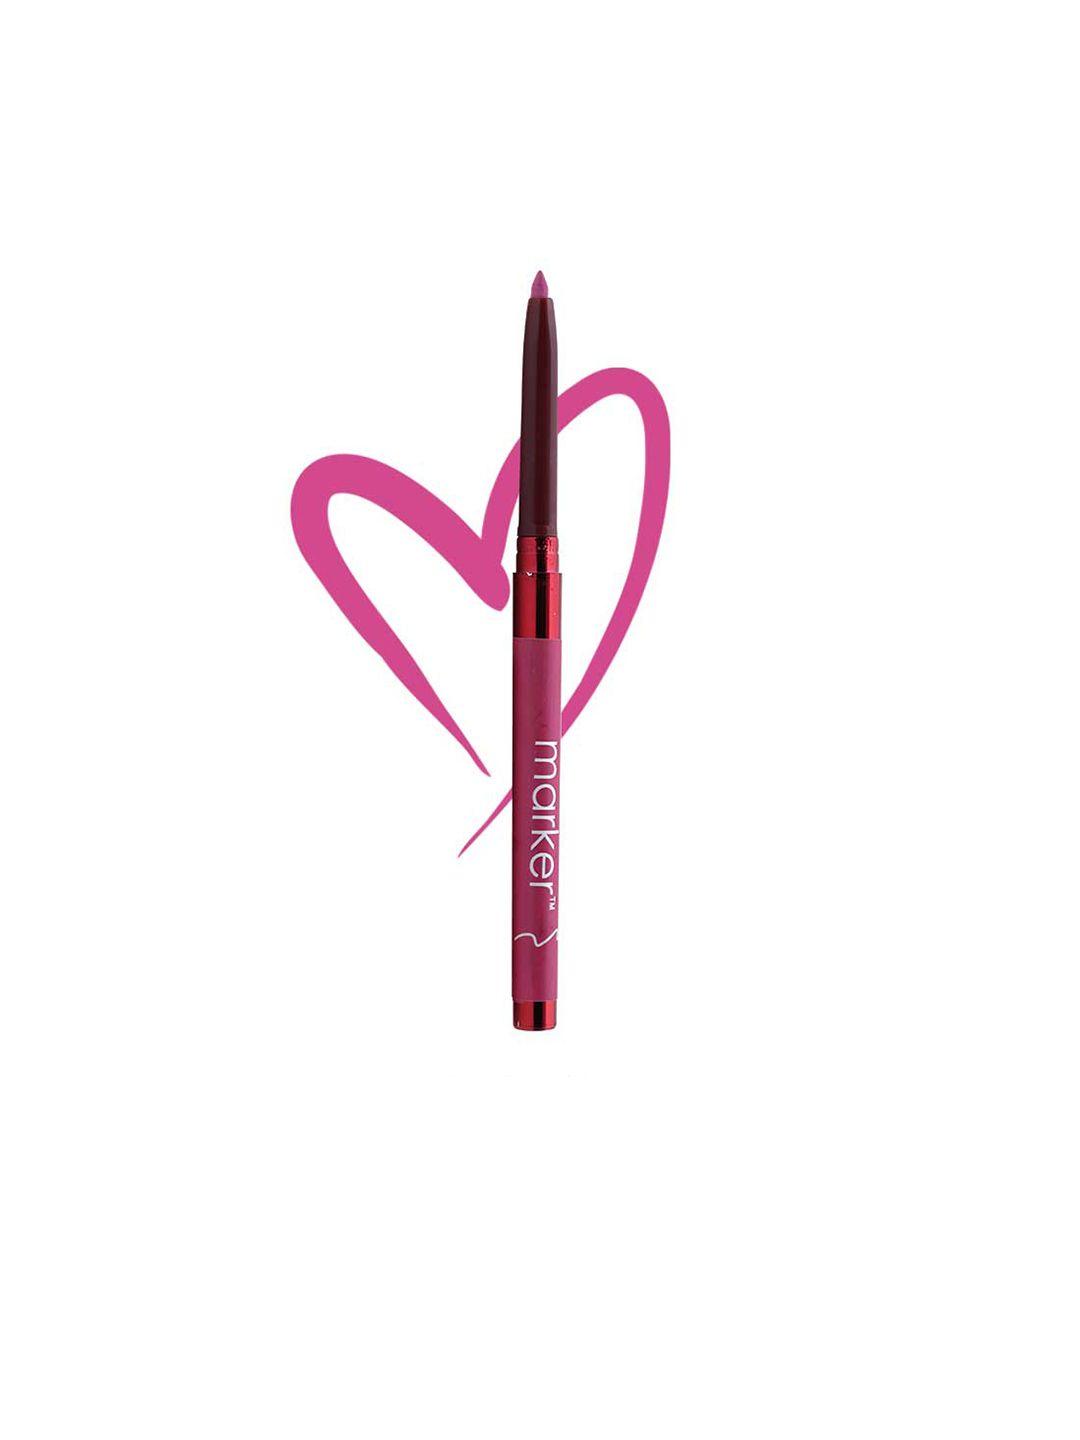 beautyrelay london outline the lips long-lasting lip liner with vitamin e 0.27g - pink alive